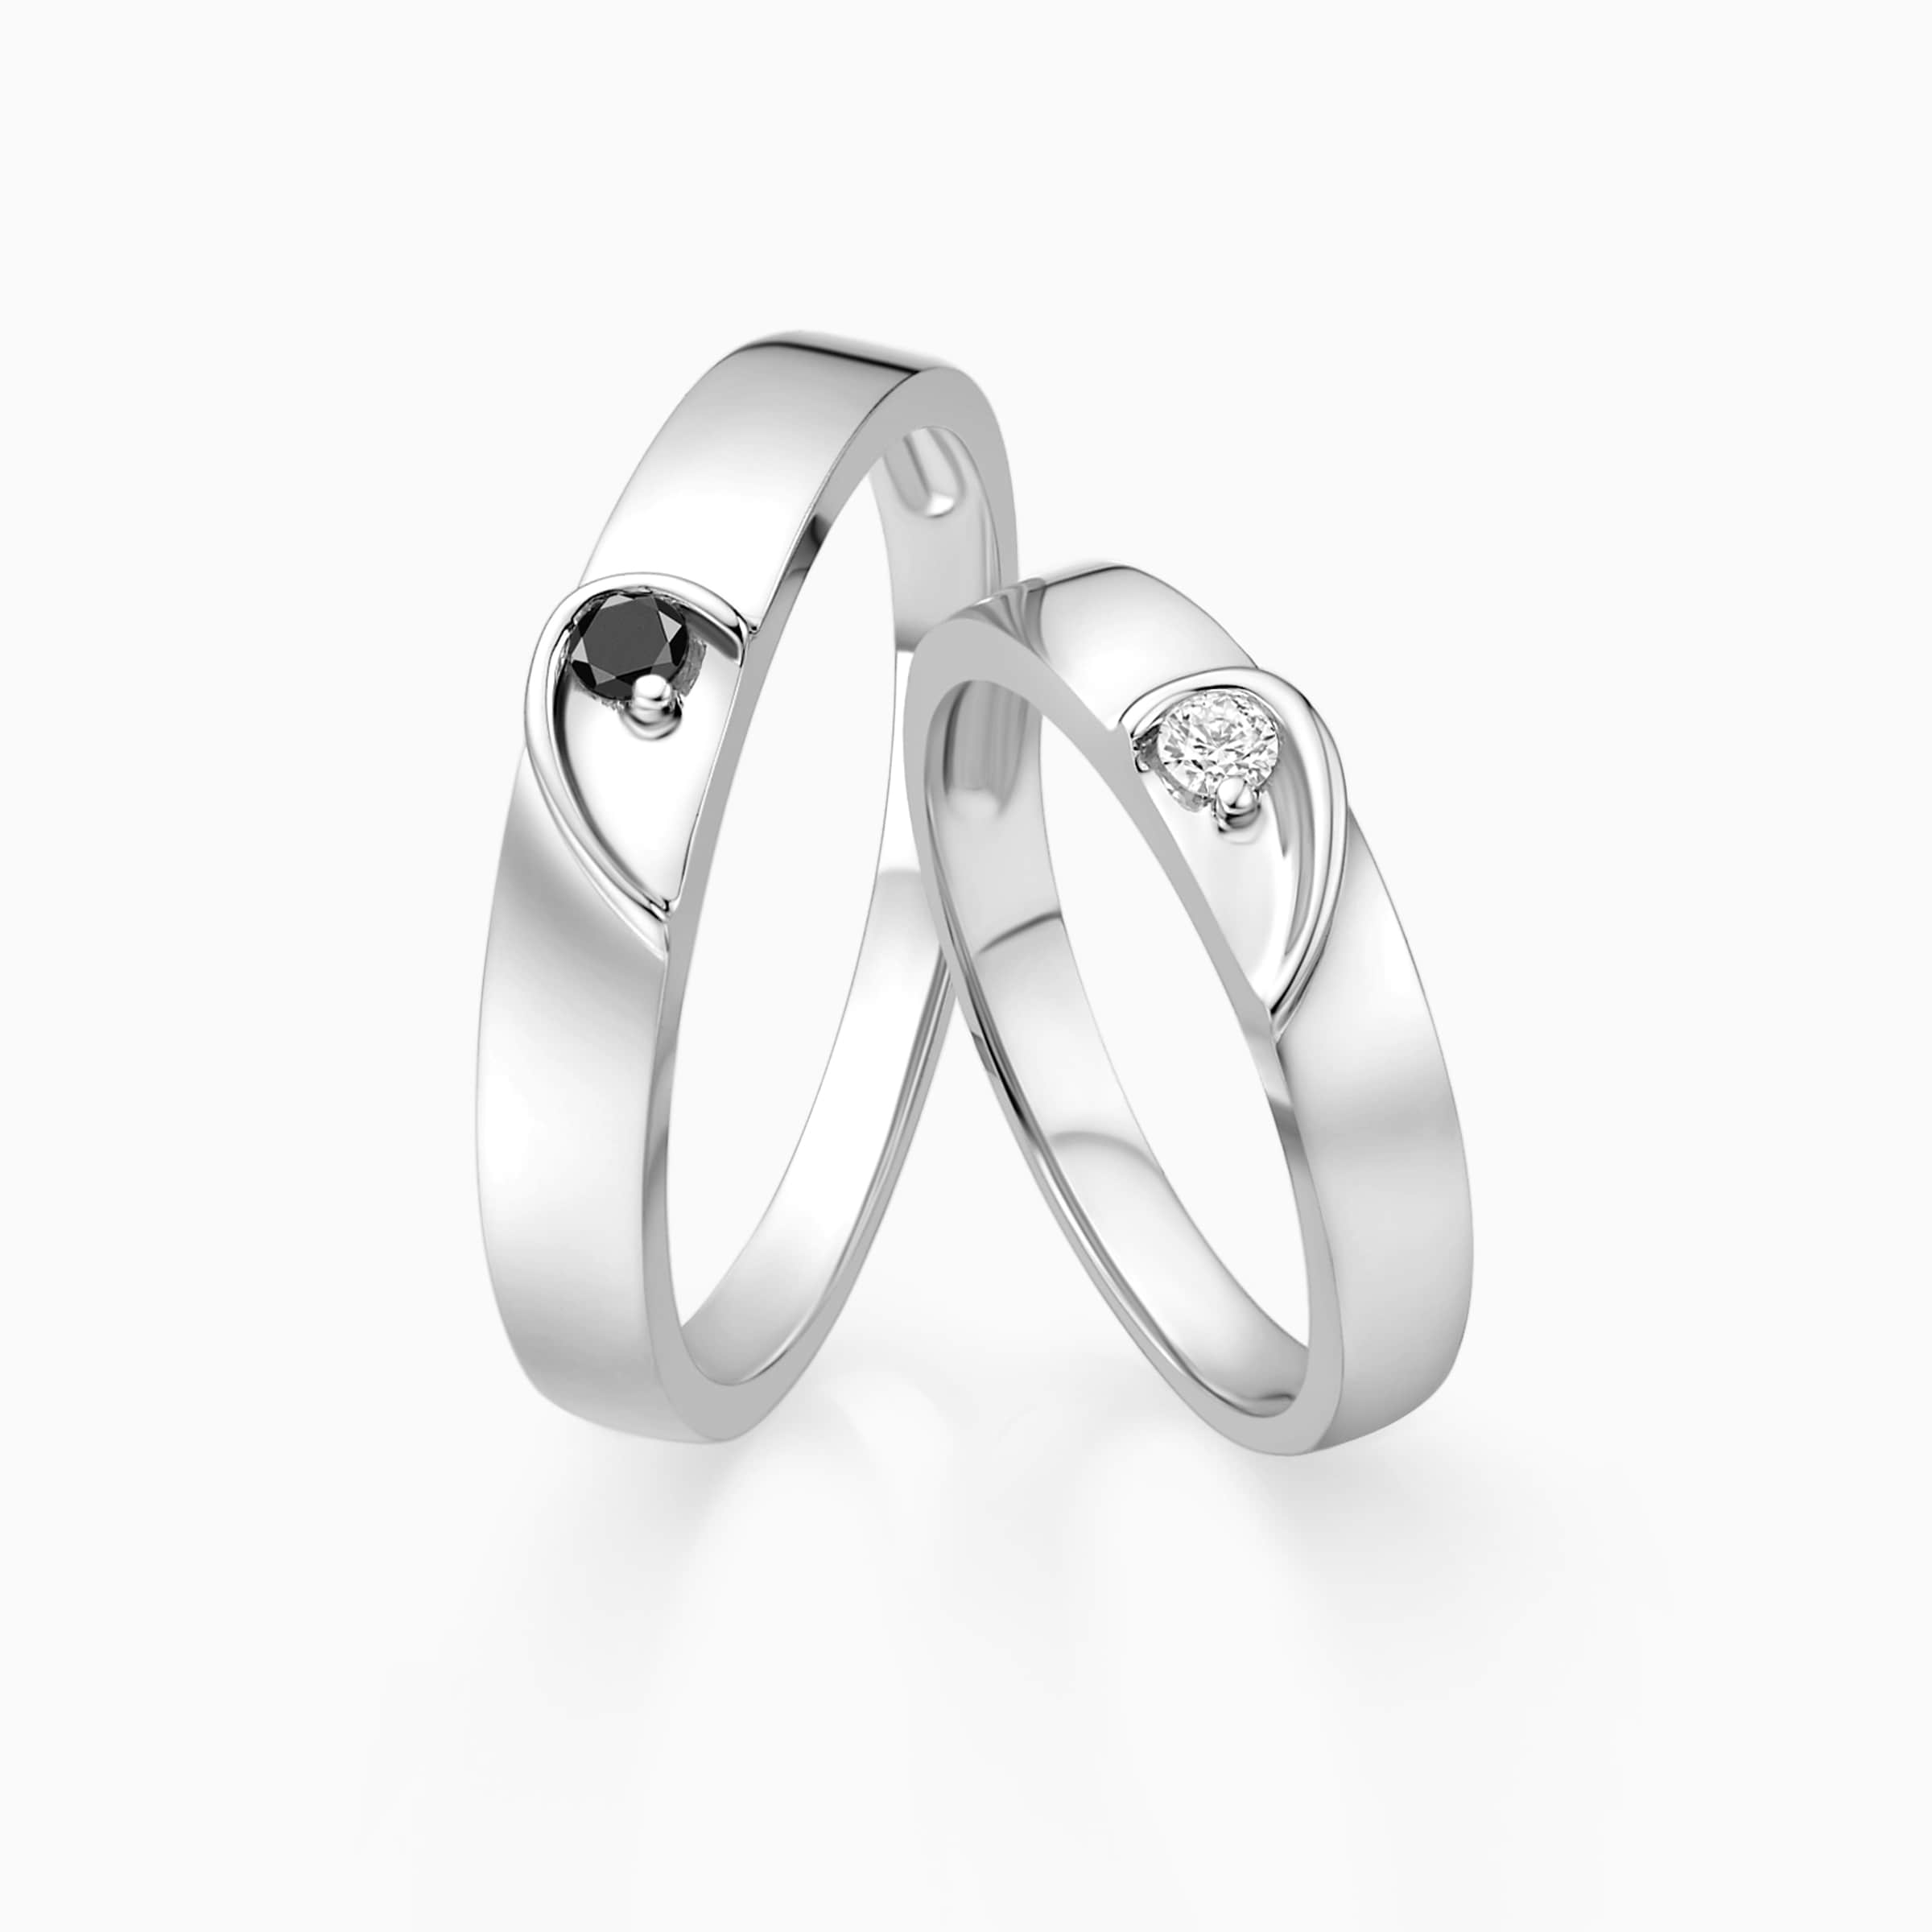 Darry Ring heart wedding rings for couple top view